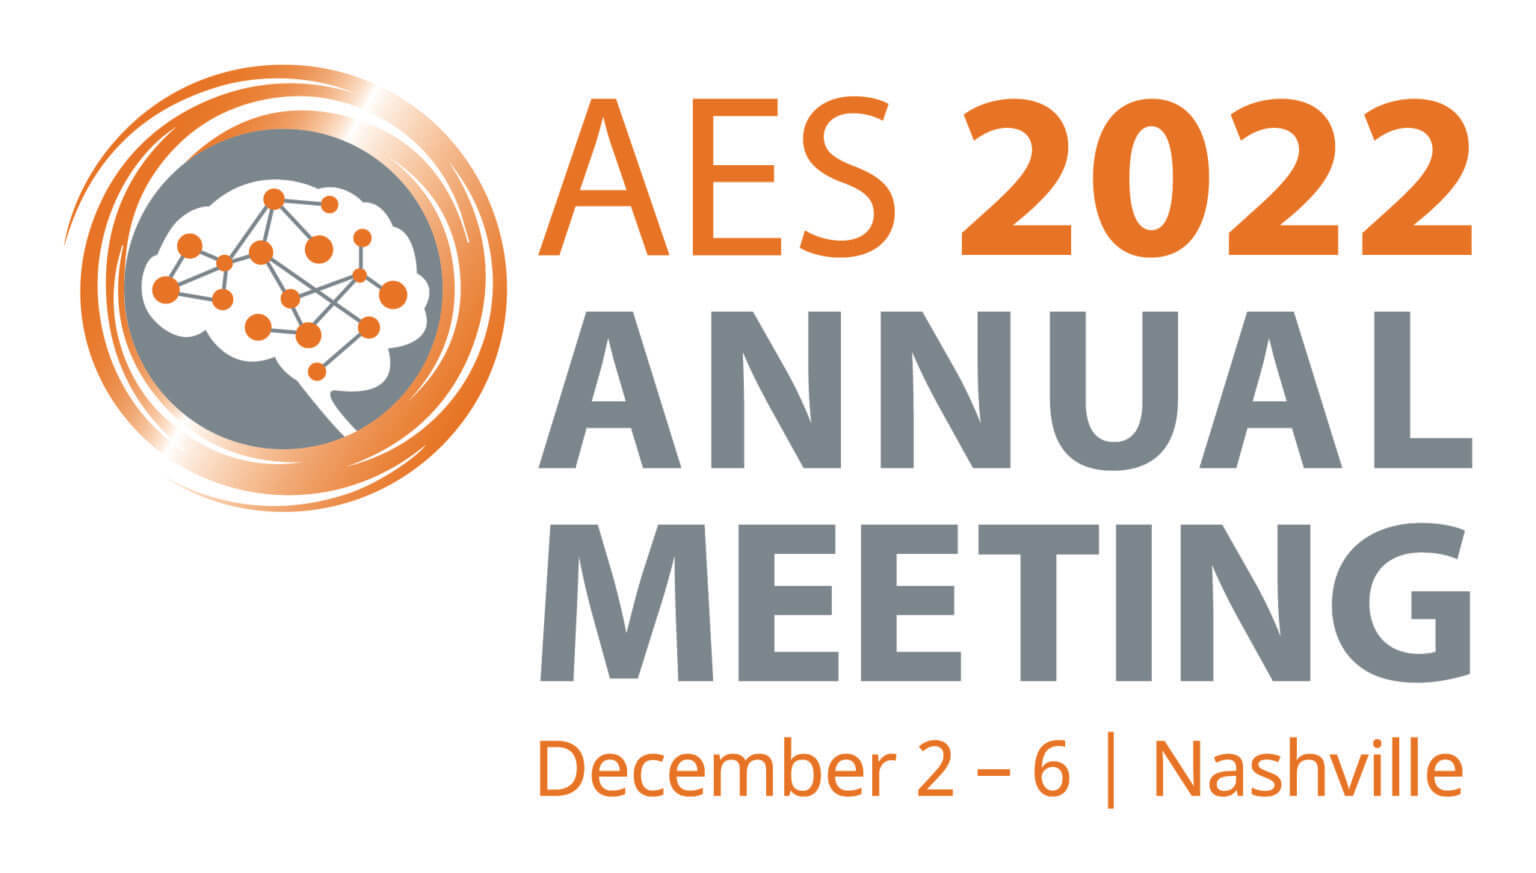 2022 American Epilepsy Society (AES) Annual Meeting